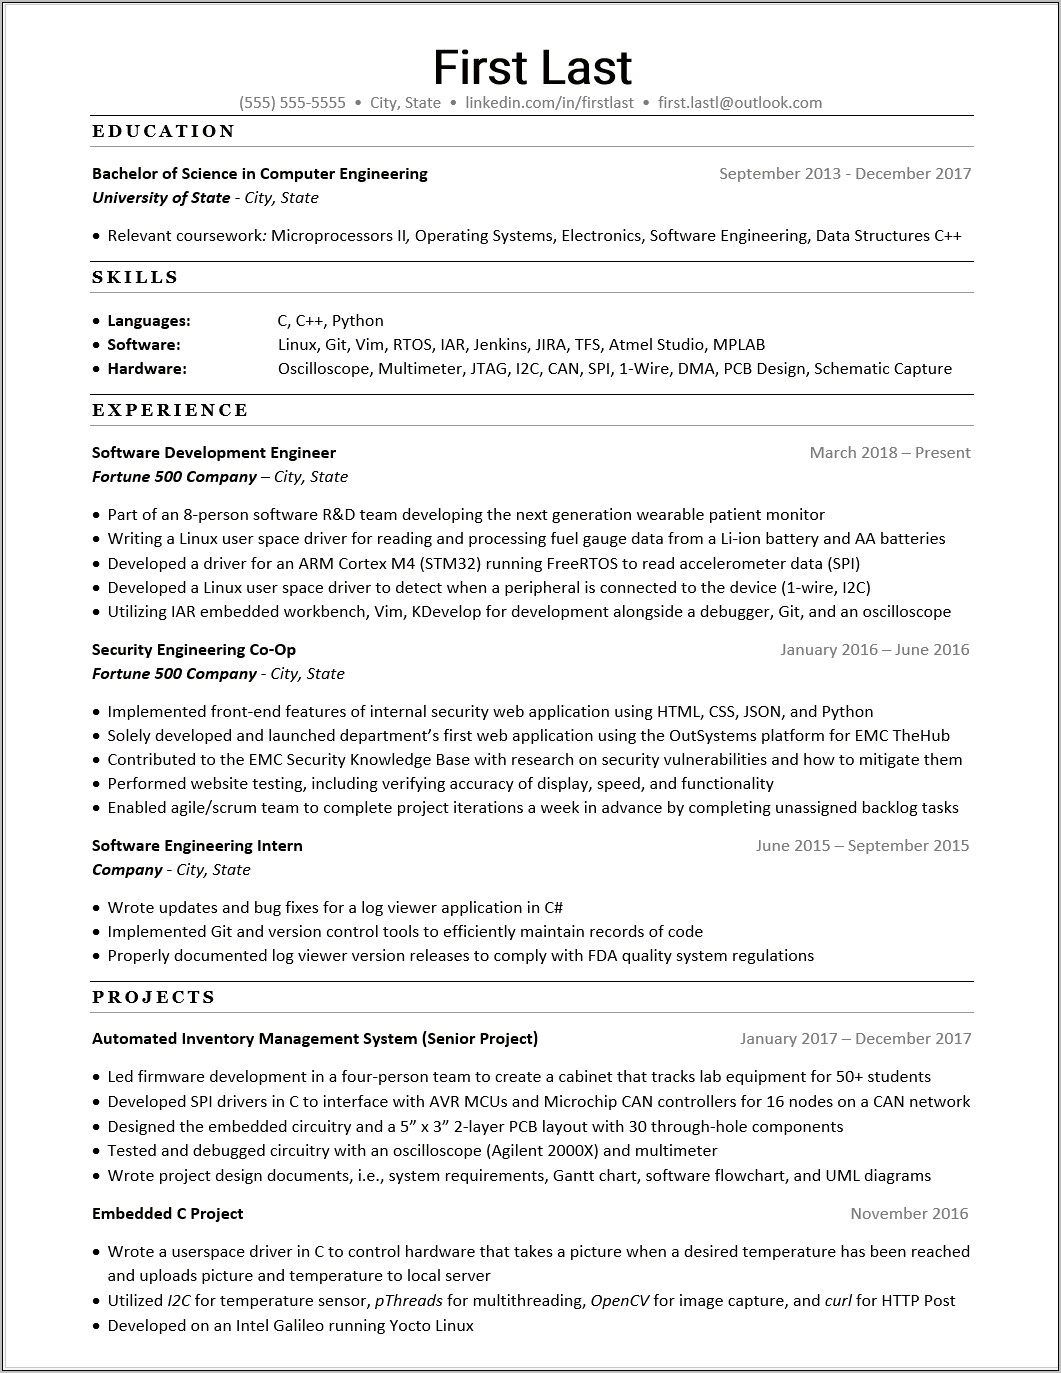 Embedded Systems Engineer No Experience Resume